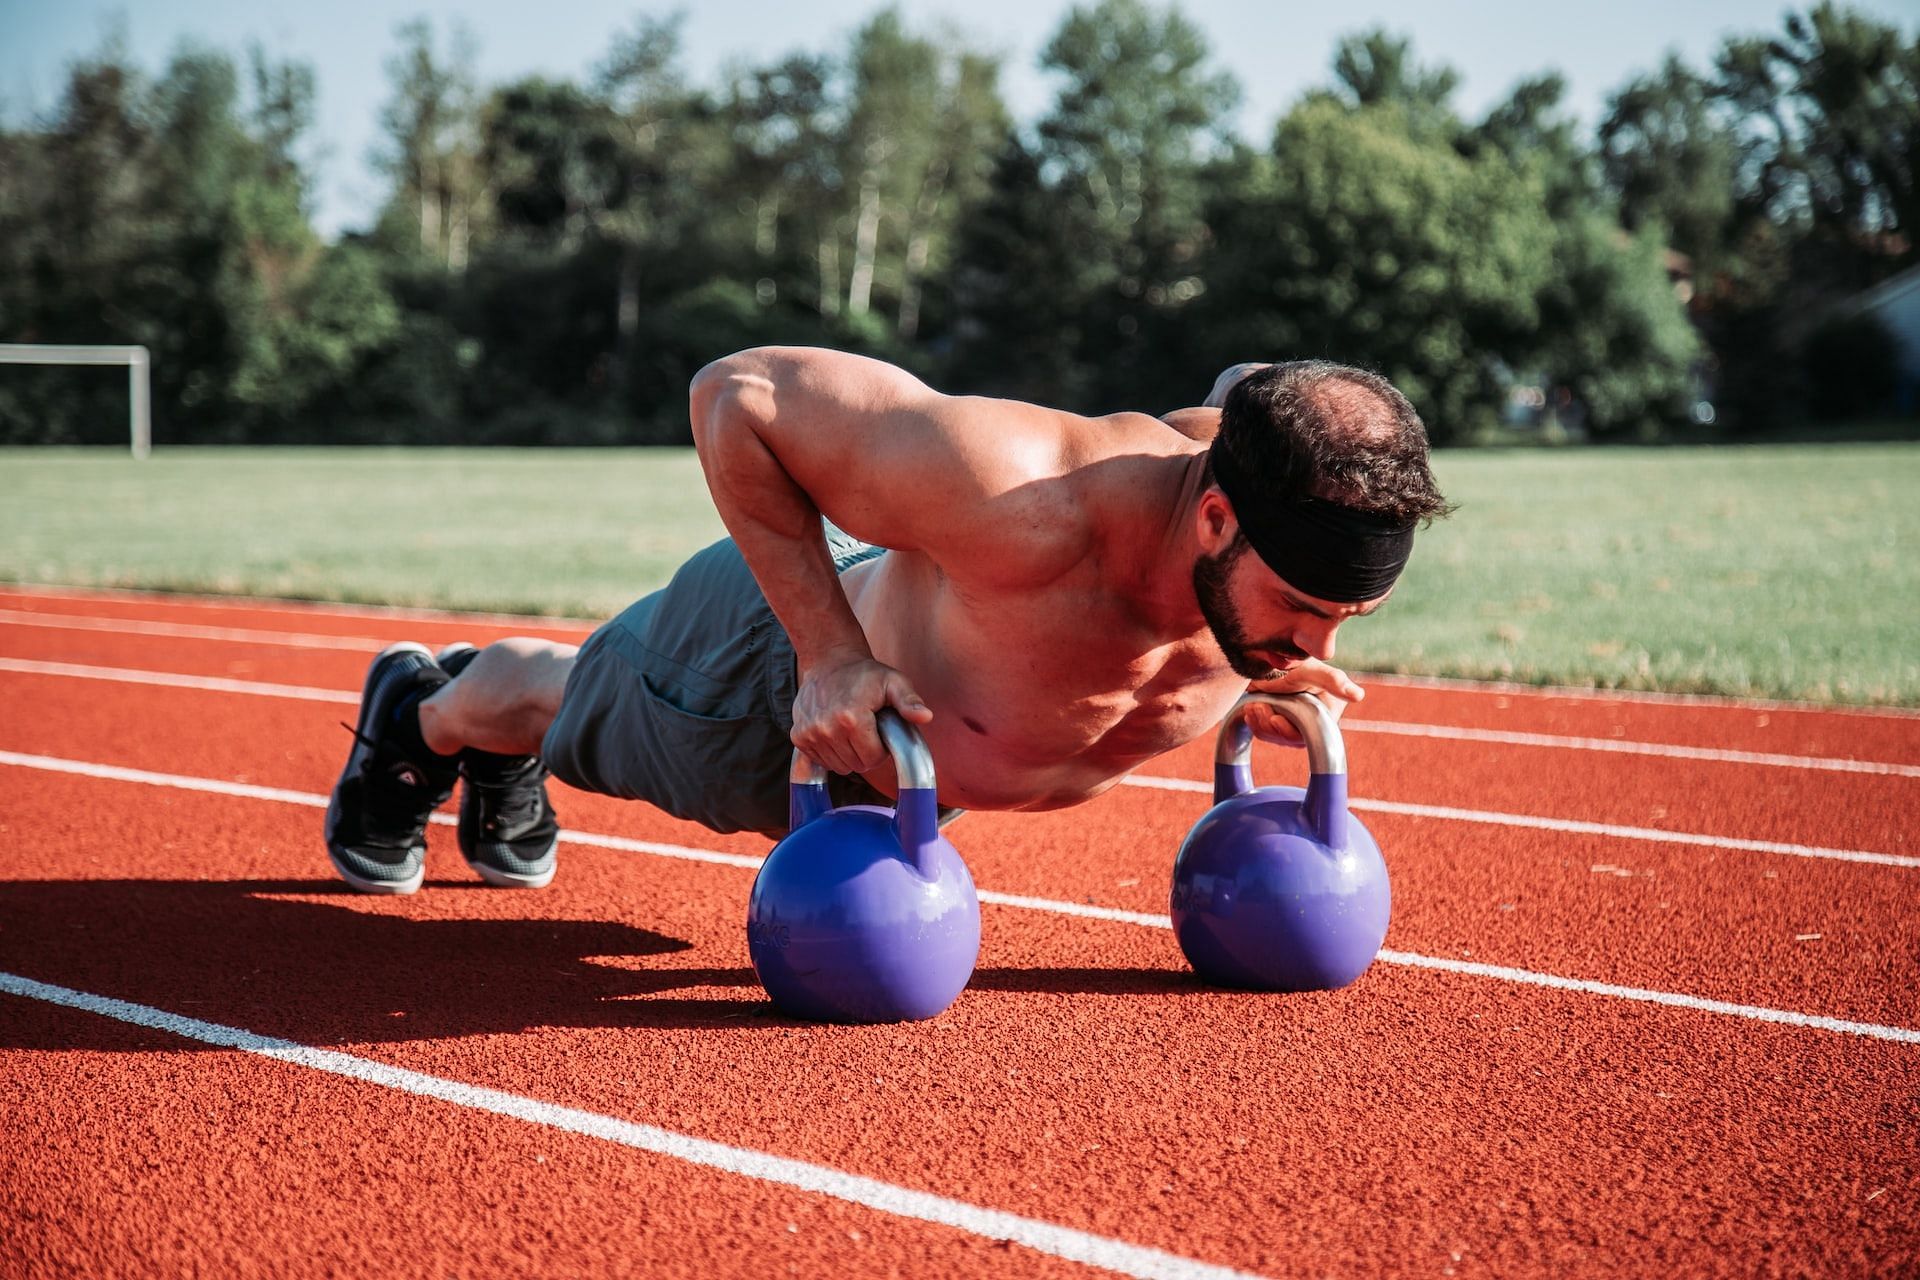 Kettlebell weight loss exercises for men and women. (Photo via Alora Griffiths/Unsplash)